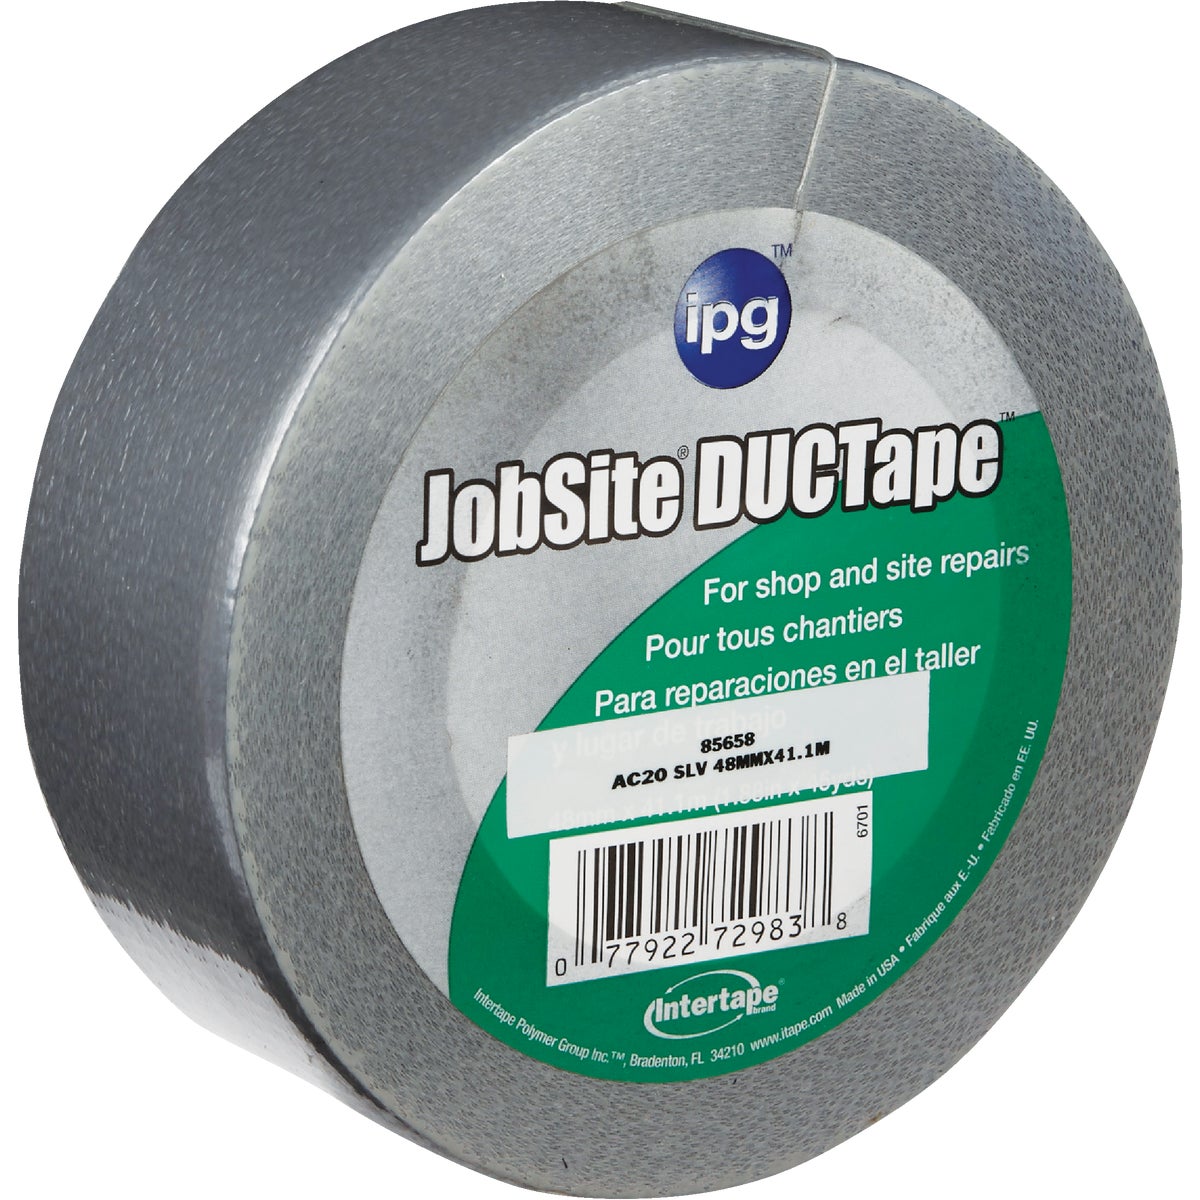 2X45YDS TAPE DUCTape GENERAL PURPOSE SILVER IPG AC20 (20/CN)